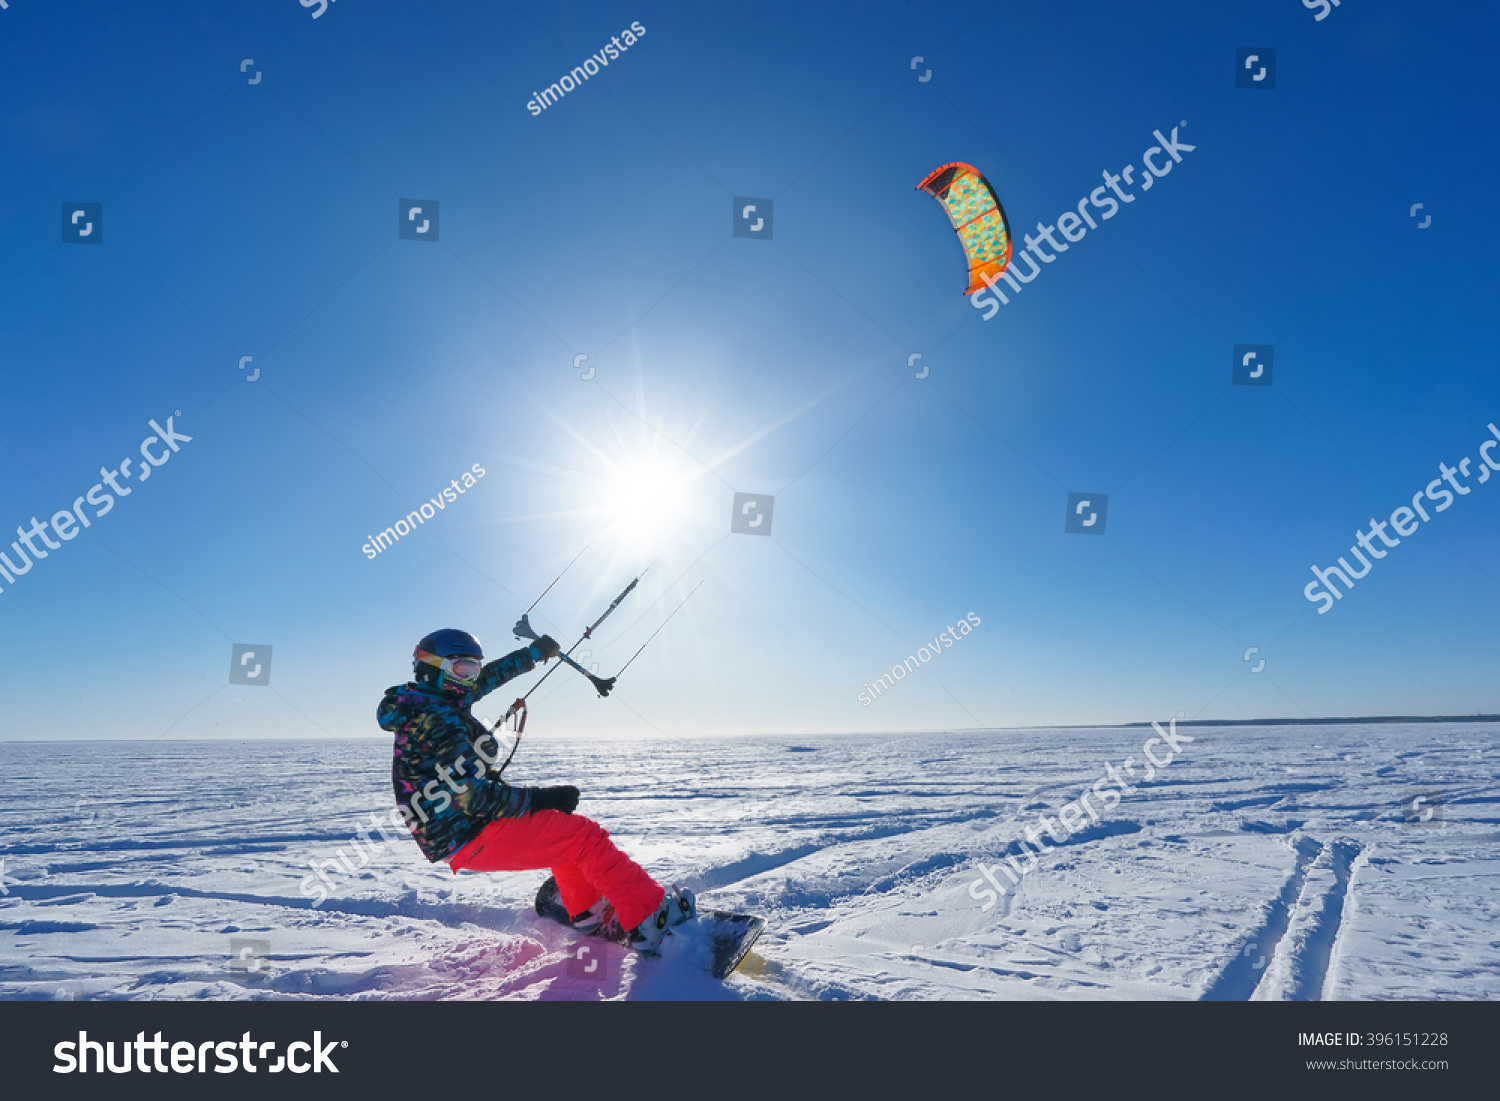 Athlete in bright clothes riding in the snow on a snowboard and kite controls. Deep blue sky and sun in the background #396151228